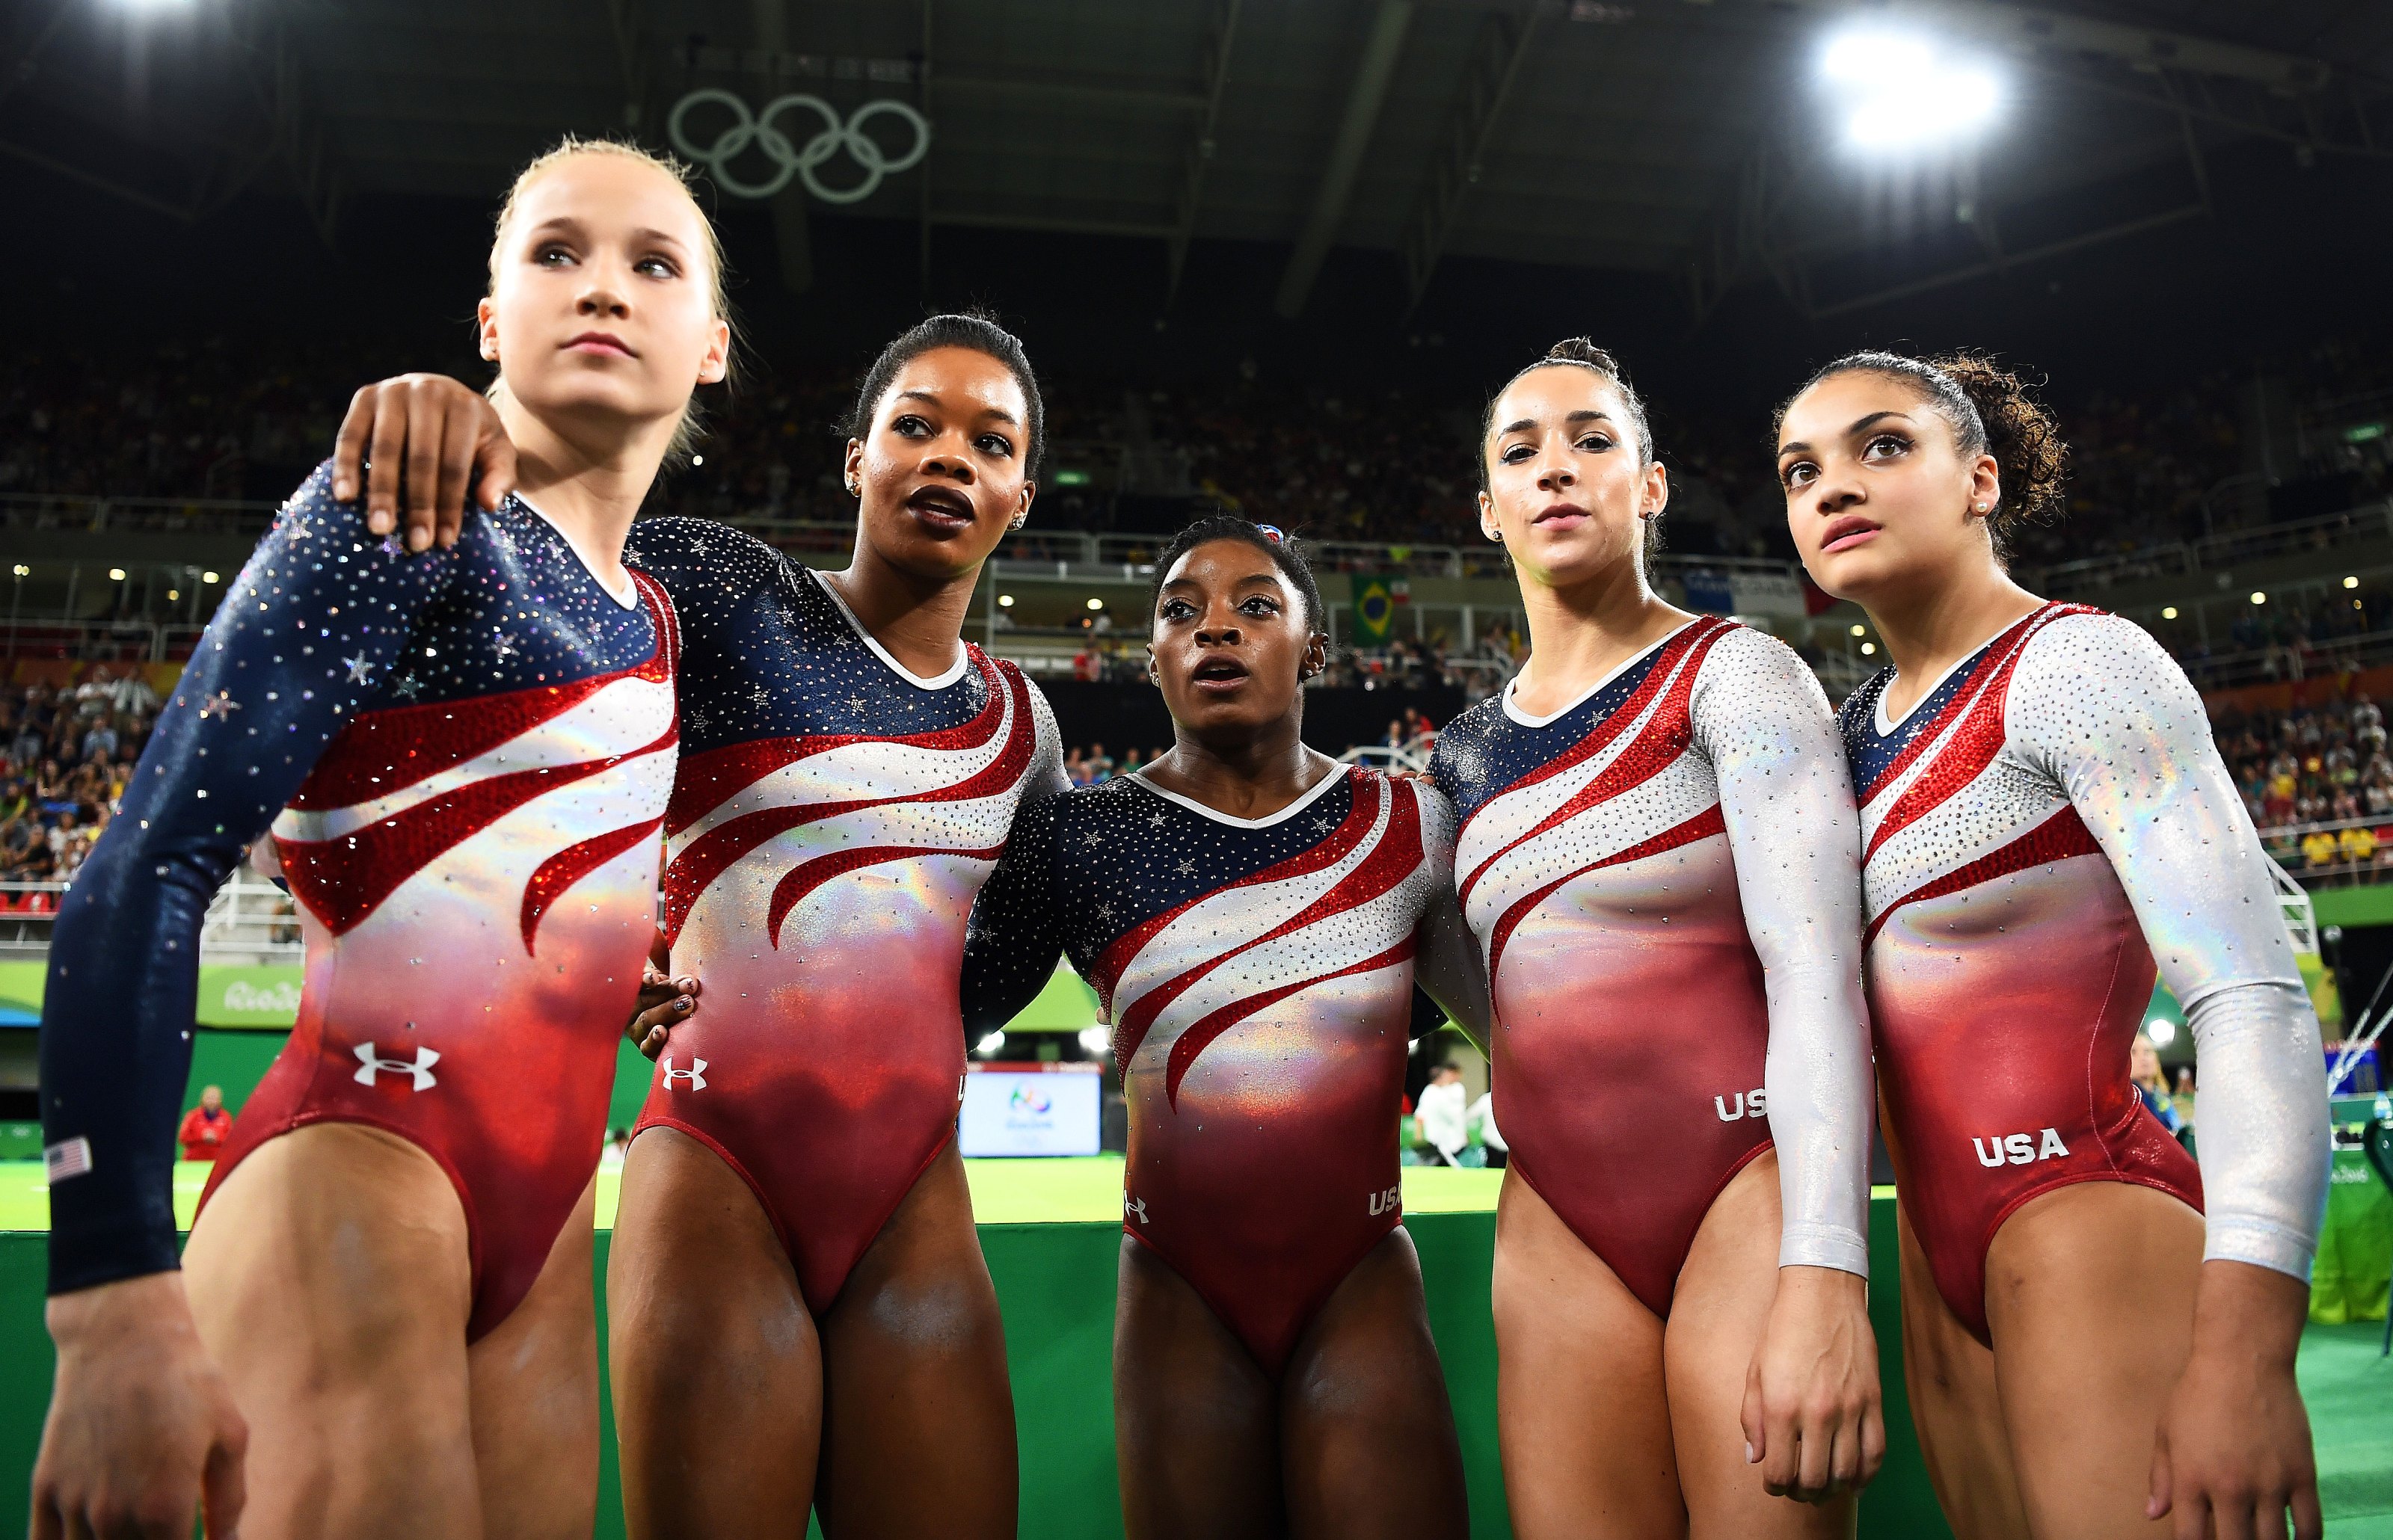 Rio Olympics Leotards Are Worth More Than Gold Medals 